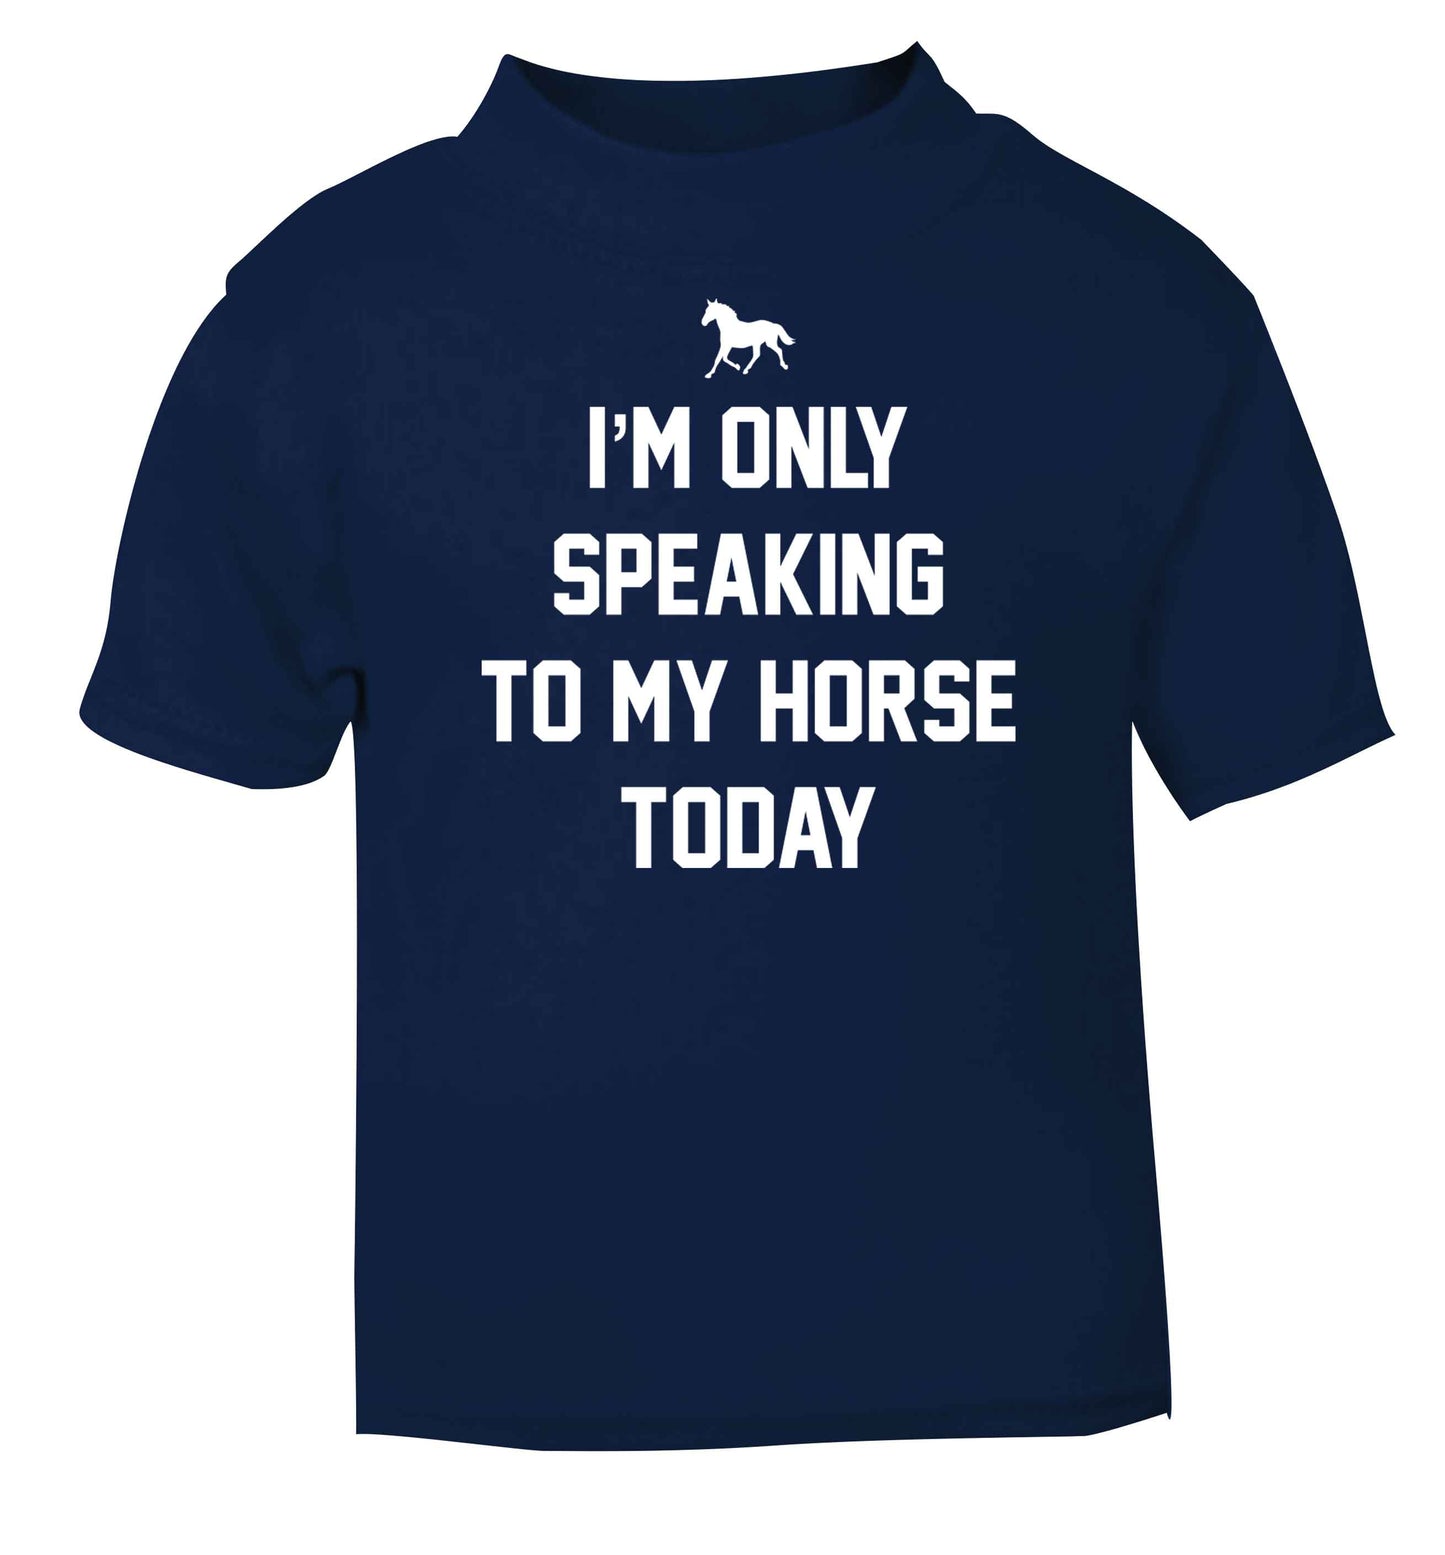 I'm only speaking to my horse today navy baby toddler Tshirt 2 Years